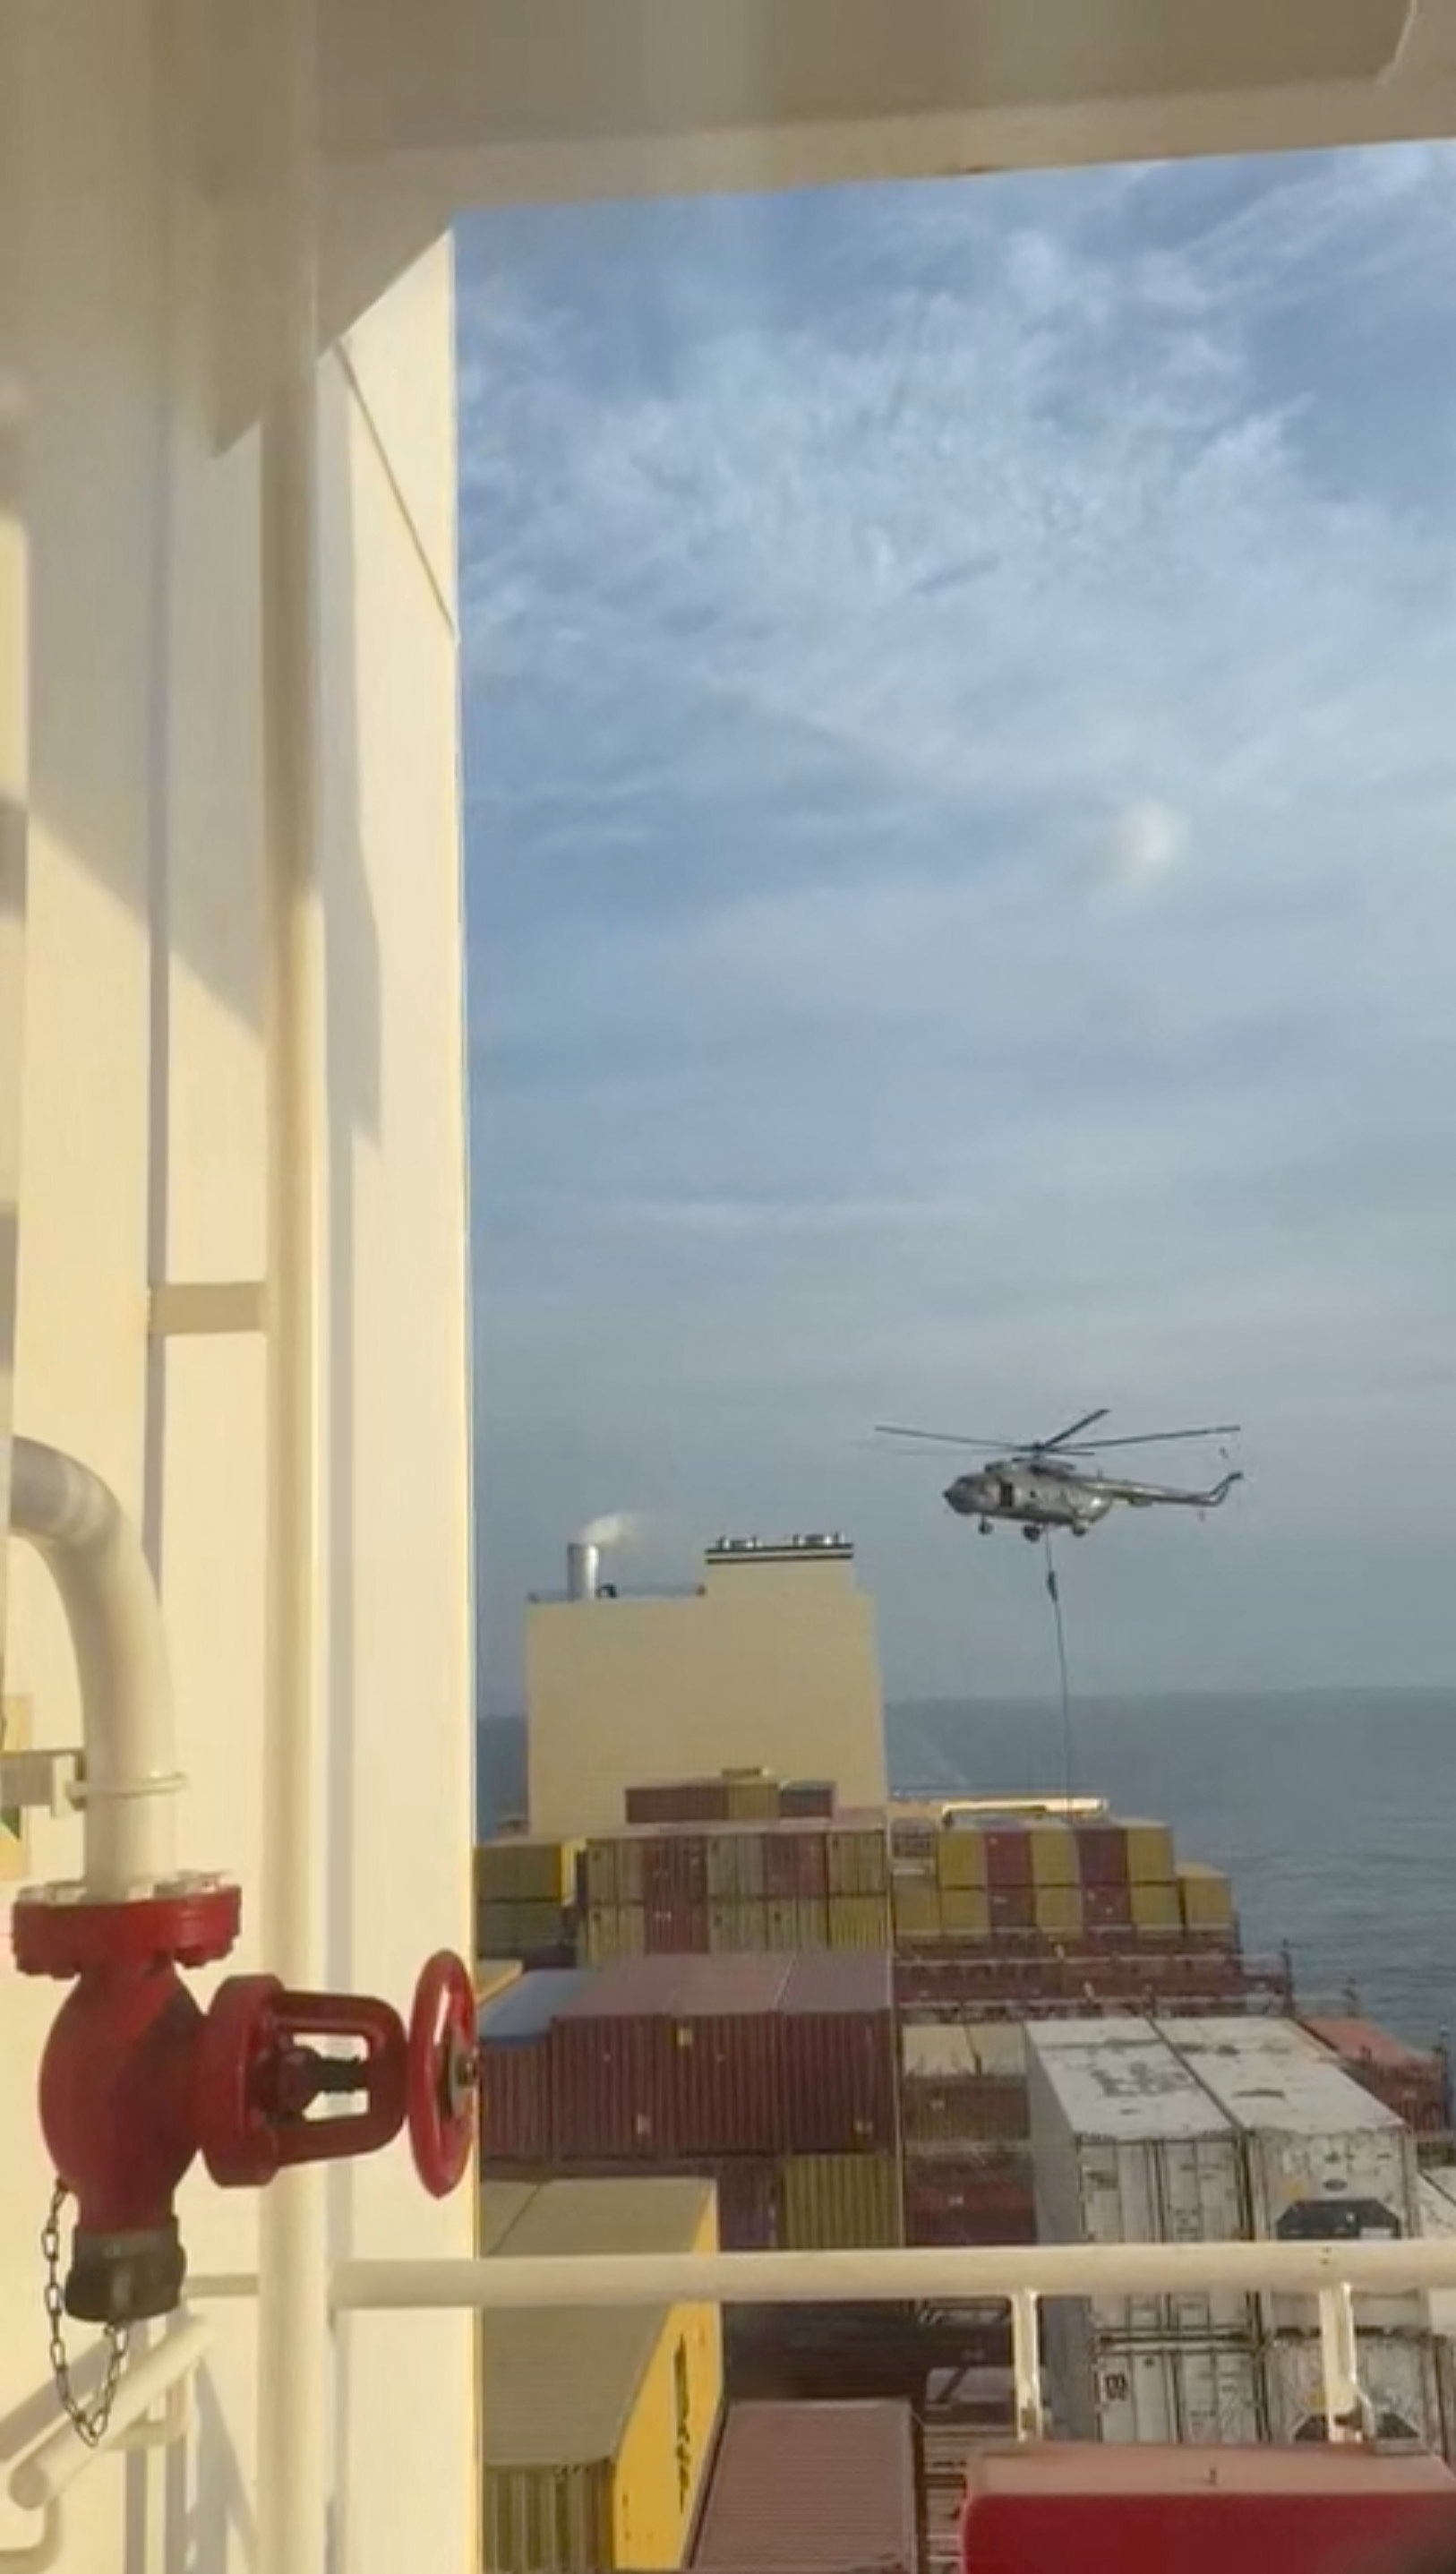 Helicopter raid on MSC Aries ship at sea